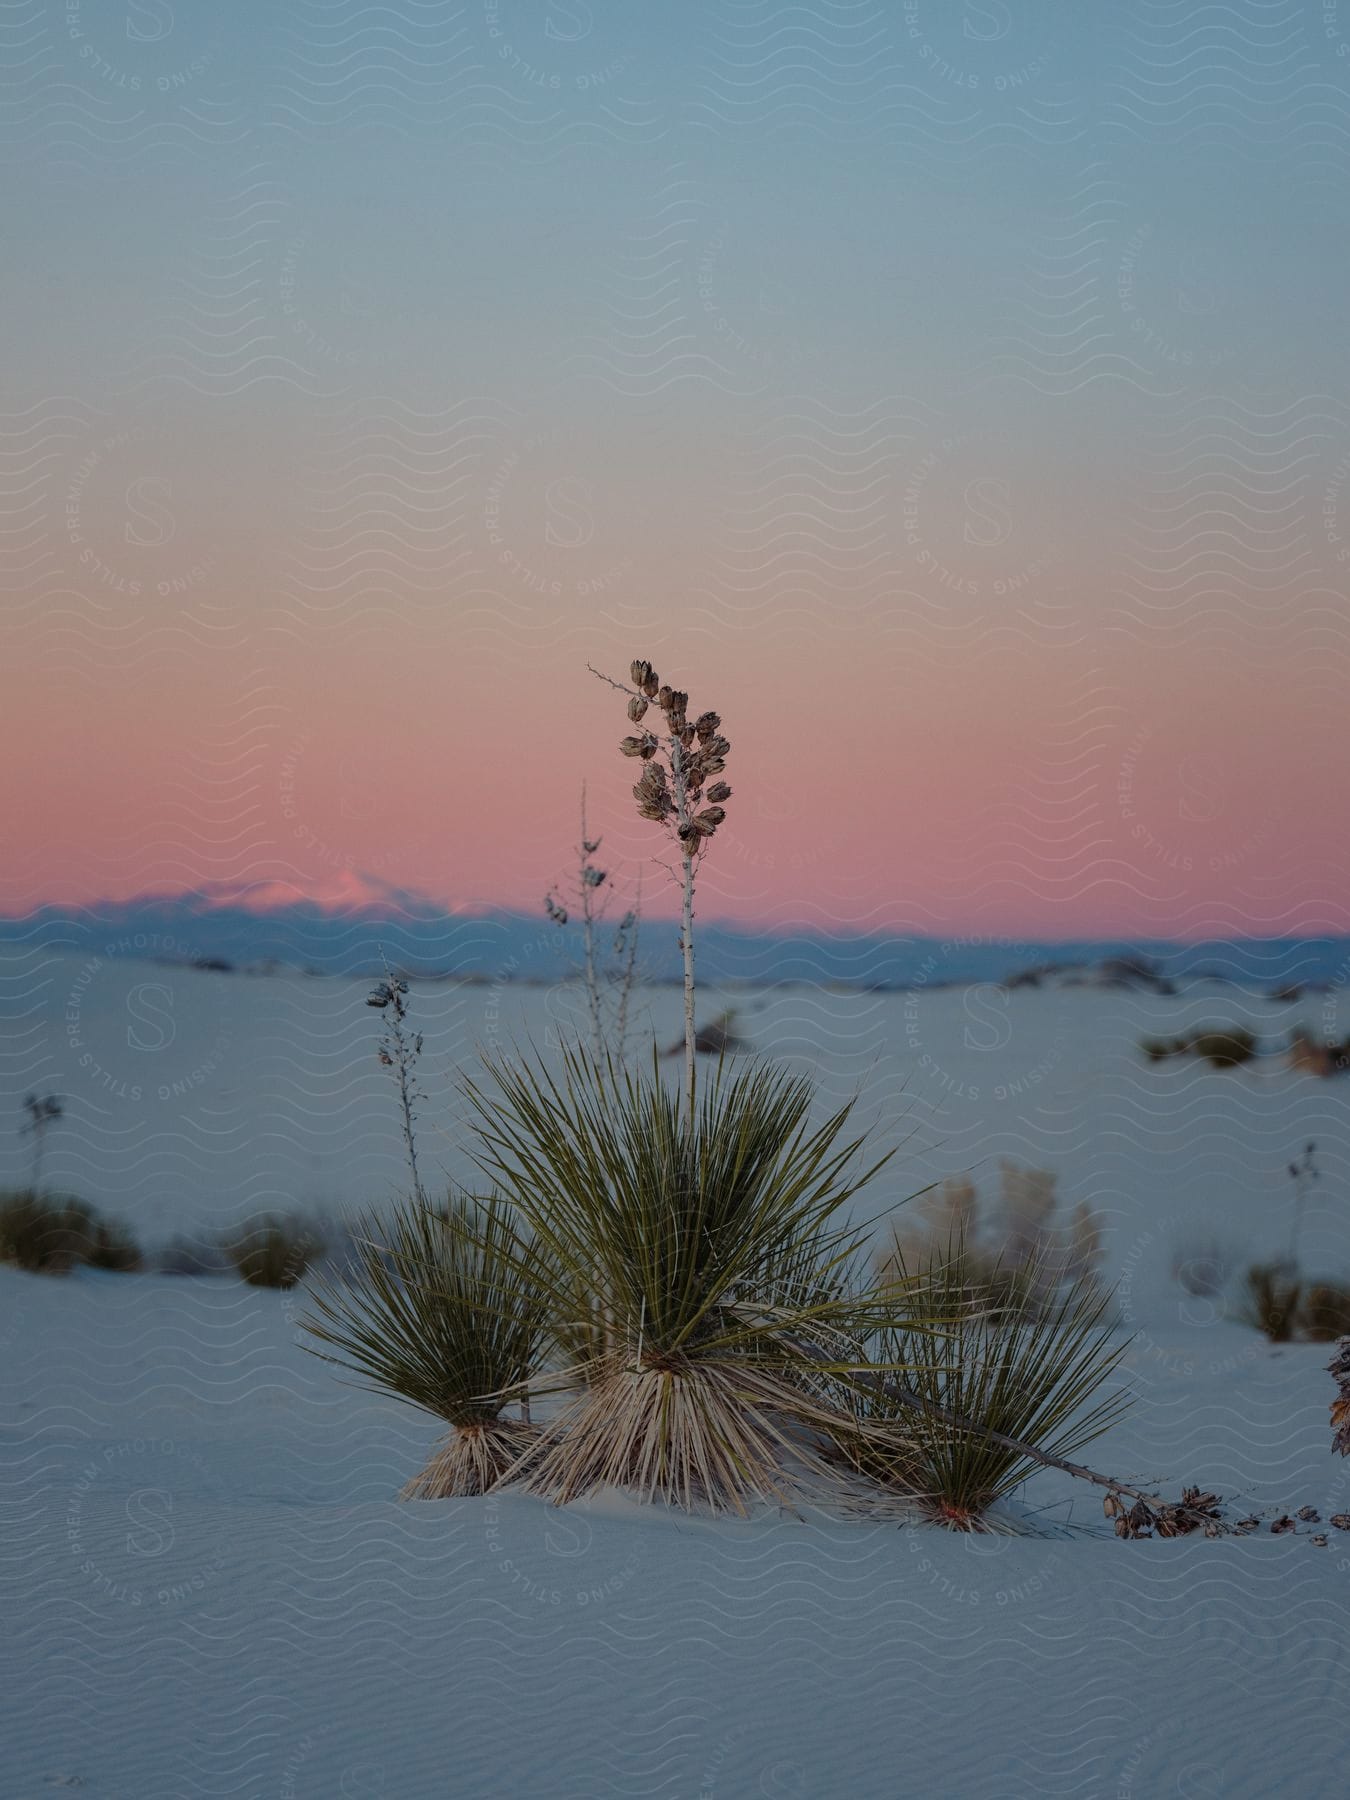 A desert plant stands in the middle of the desert with a sunset in the background